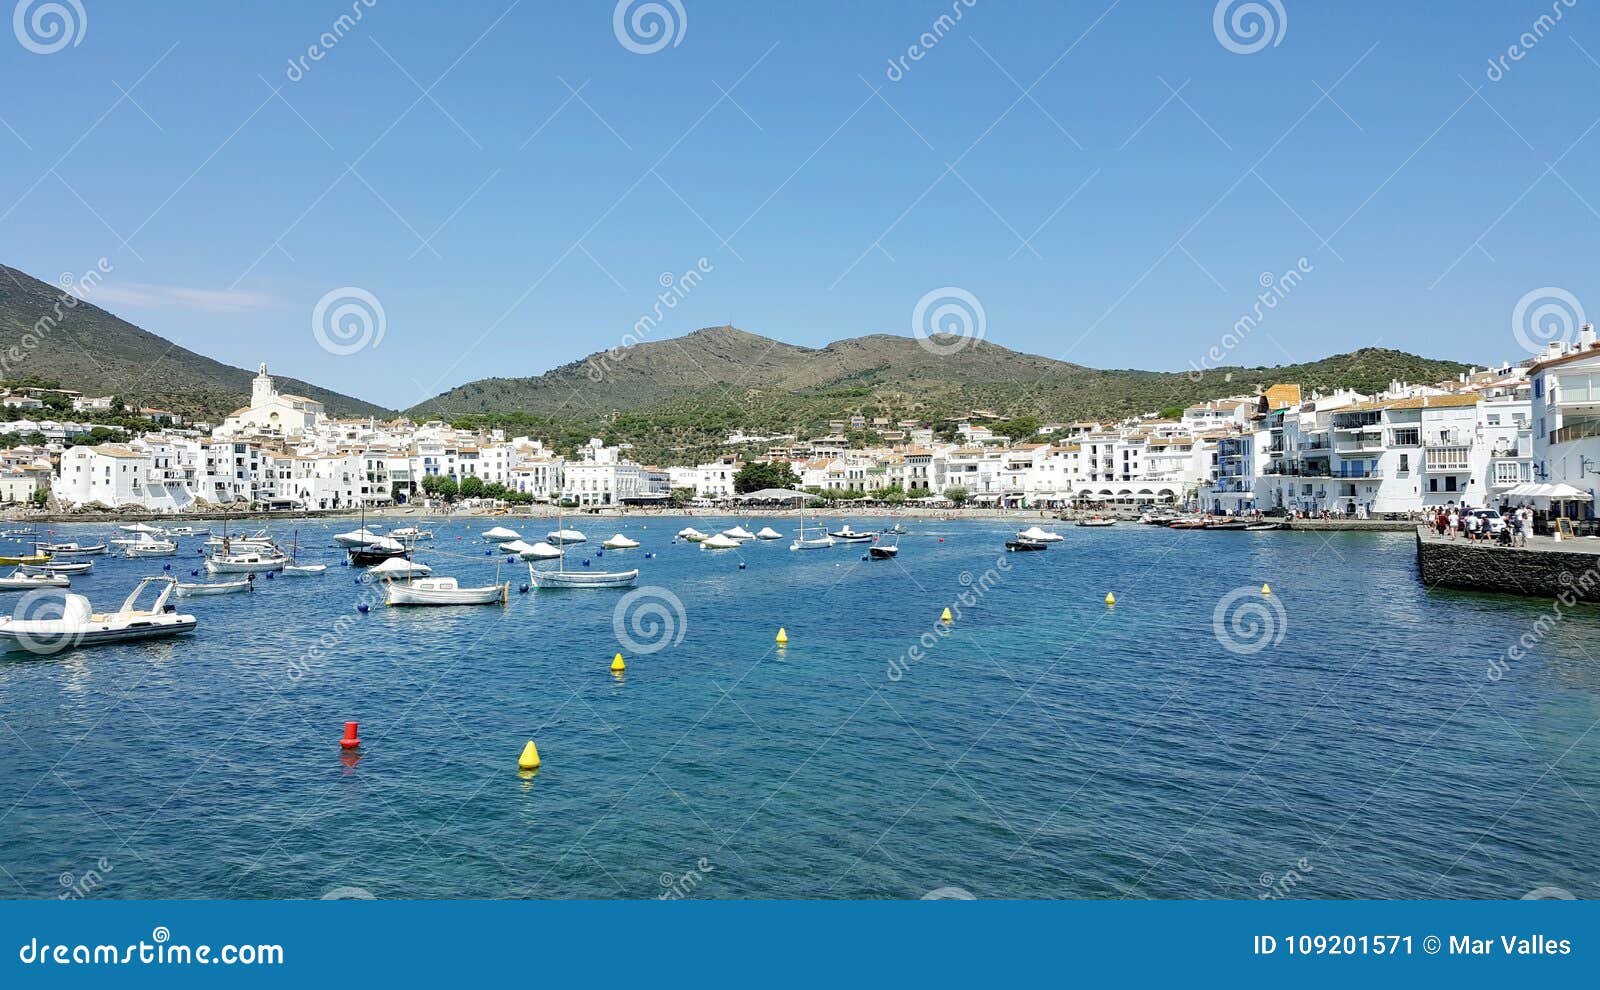 spanish port full of boats and white houses